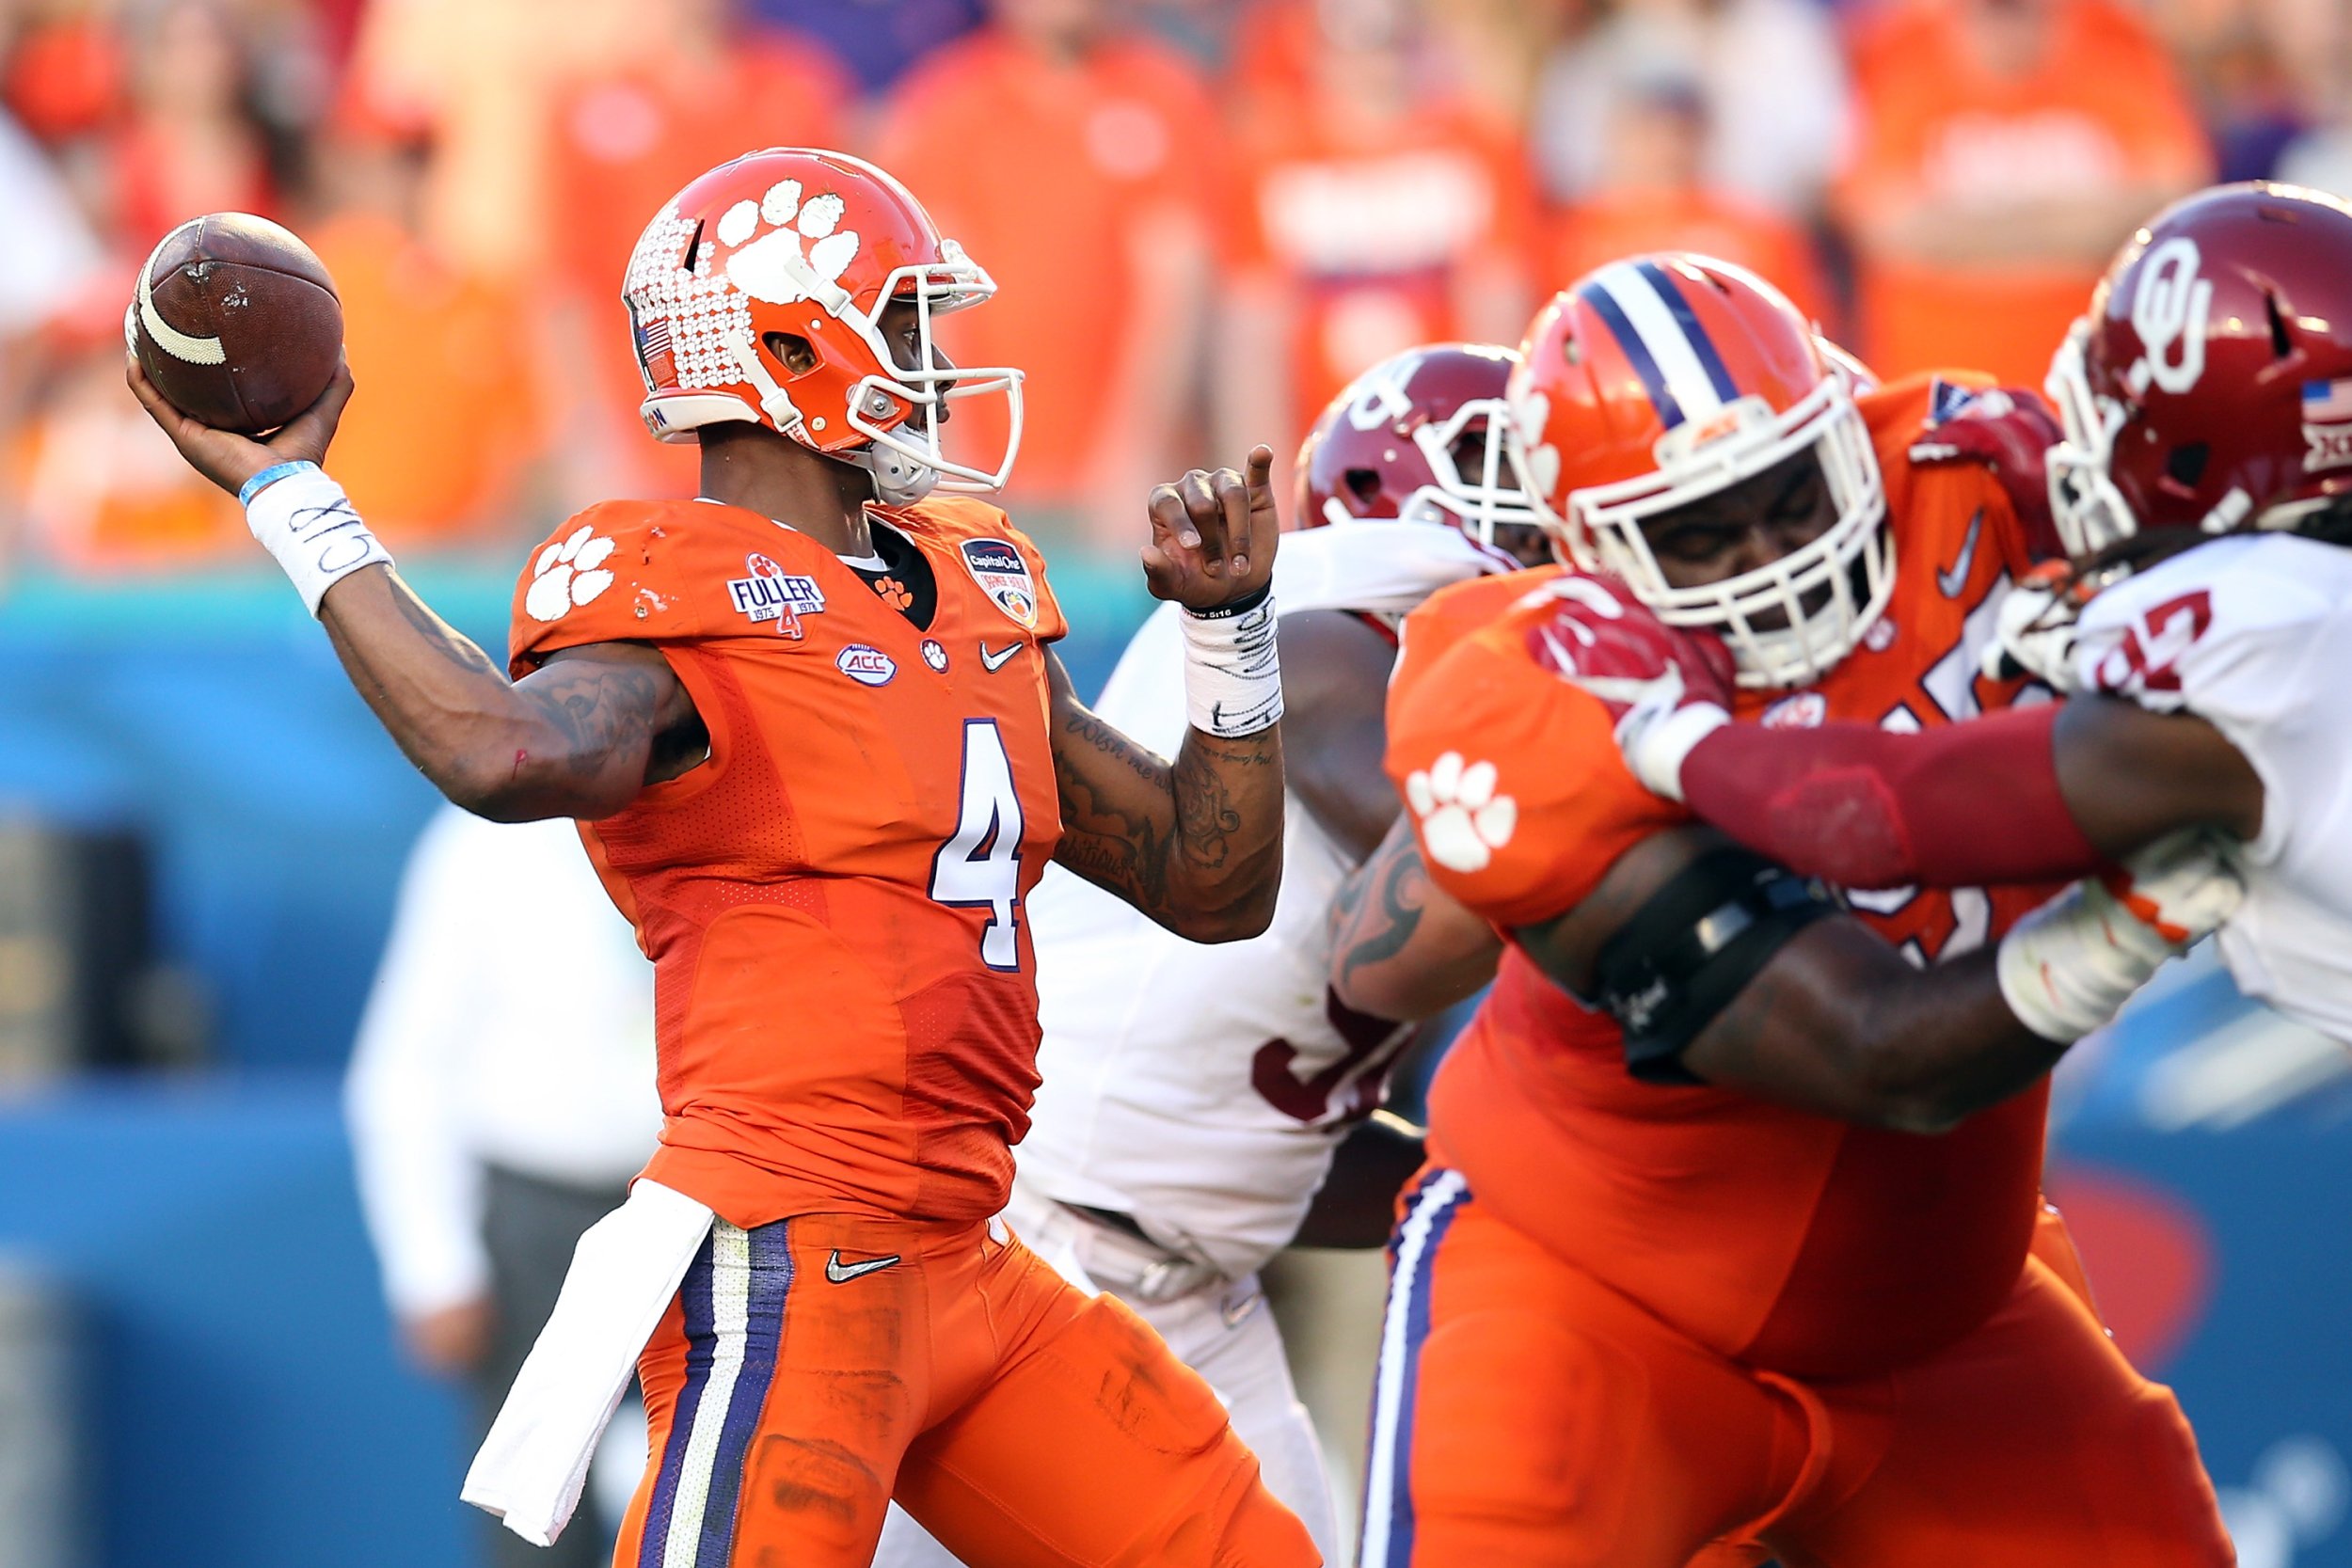 Alabama vs. Clemson Football 3 Reasons The Tigers Can Upset The